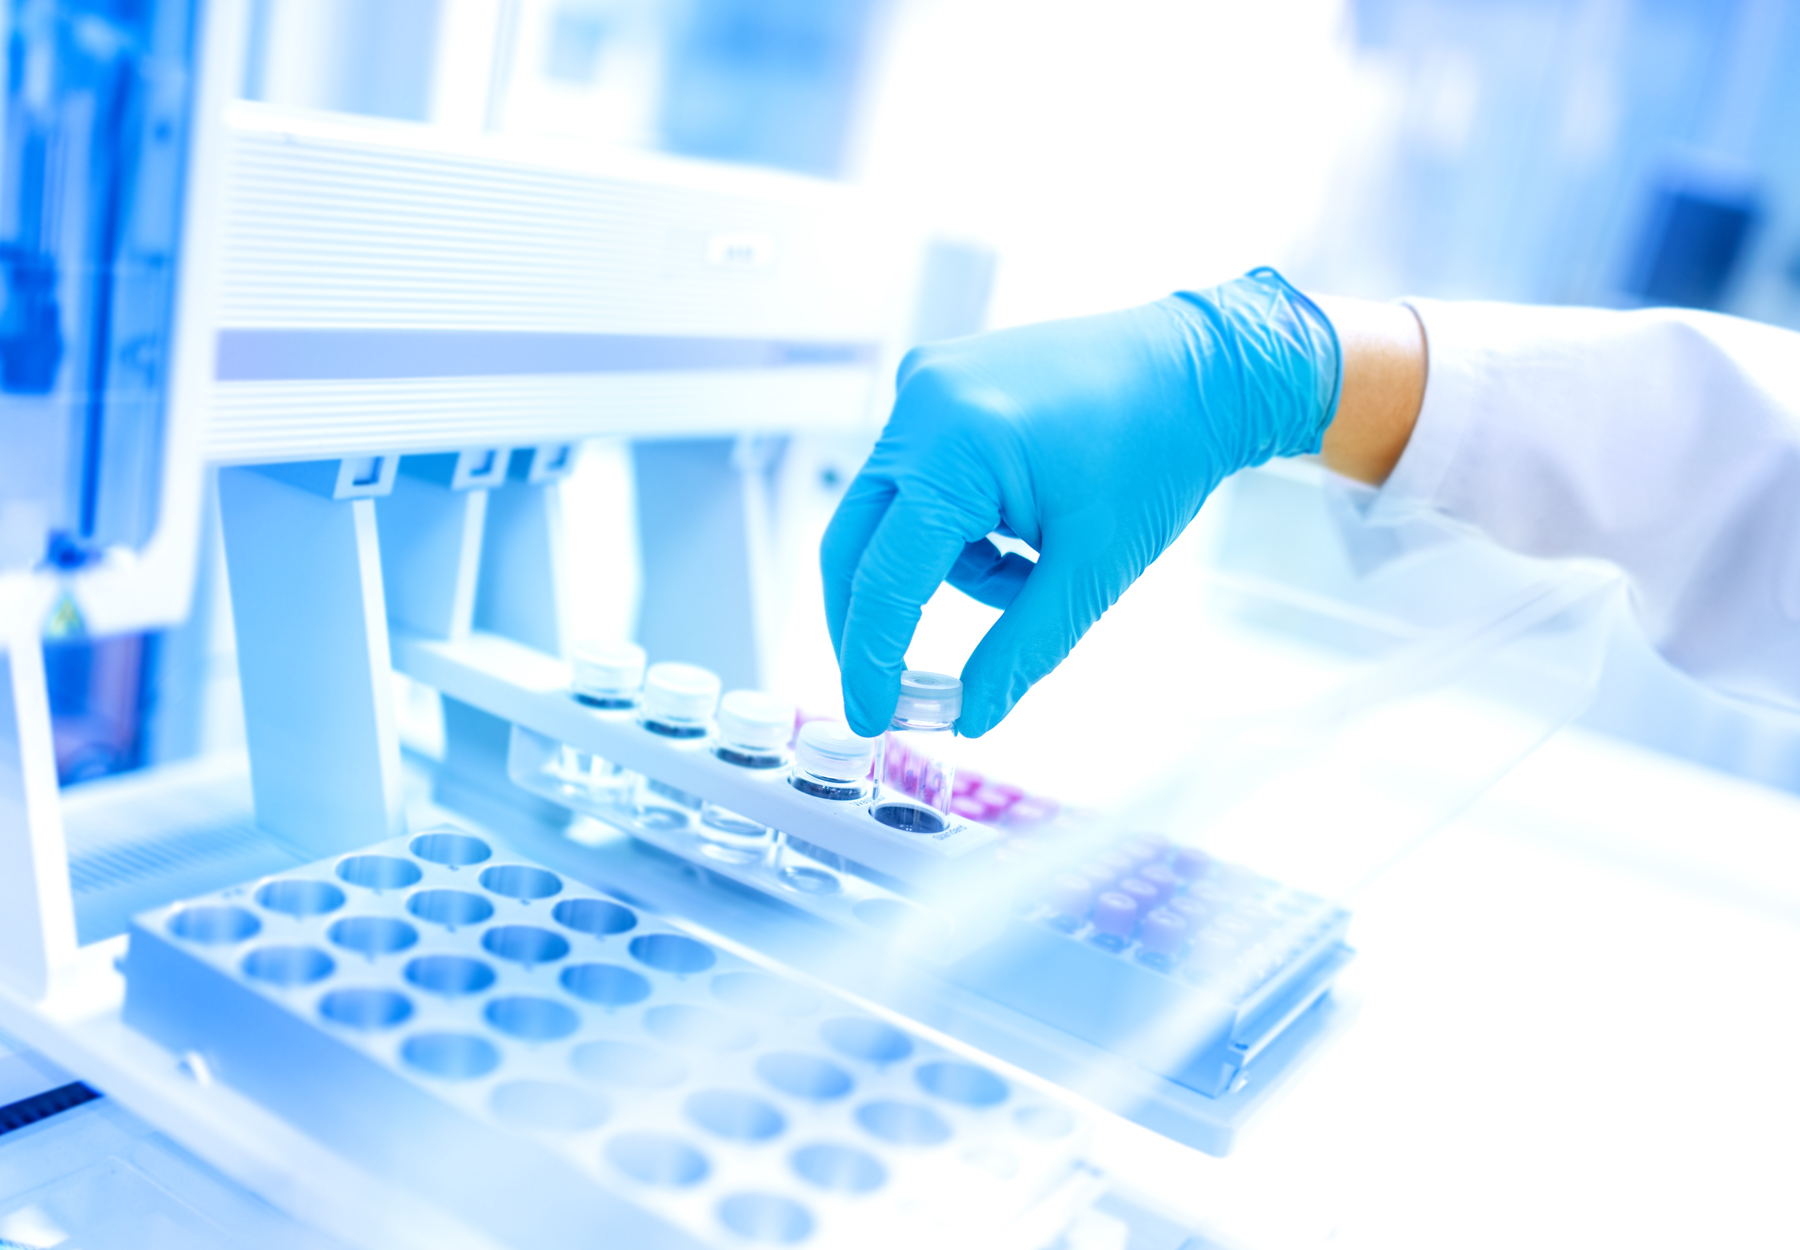 Closeup of gloved hand of lab worker loading clinical lab machine. Blue and white tones. Stock photo.